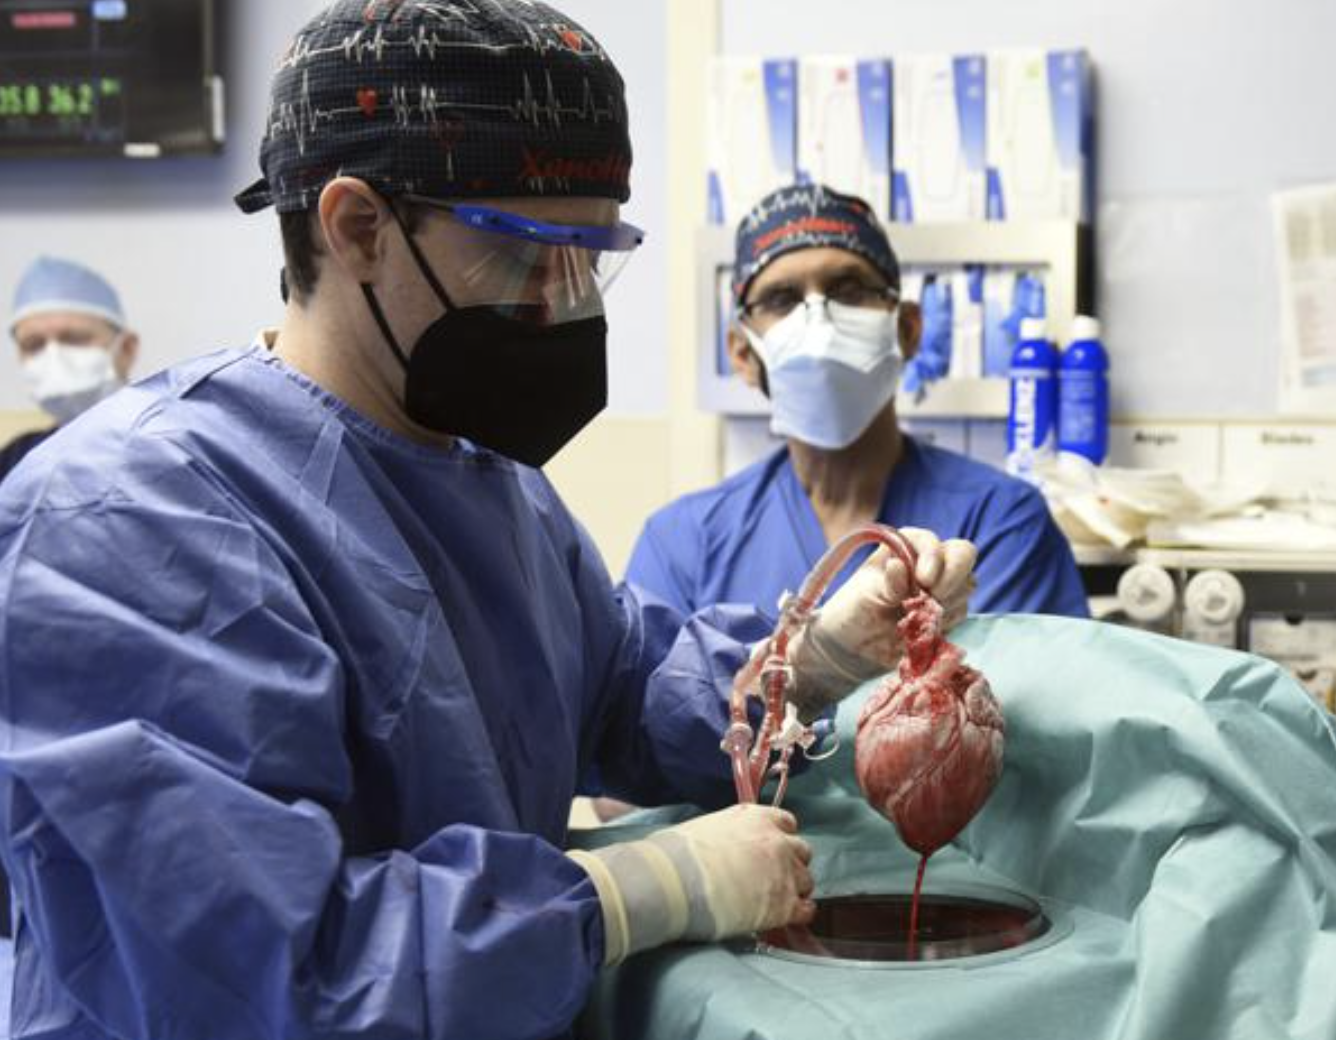 Members of the surgical team show the pig heart for transplant into patient David Bennett